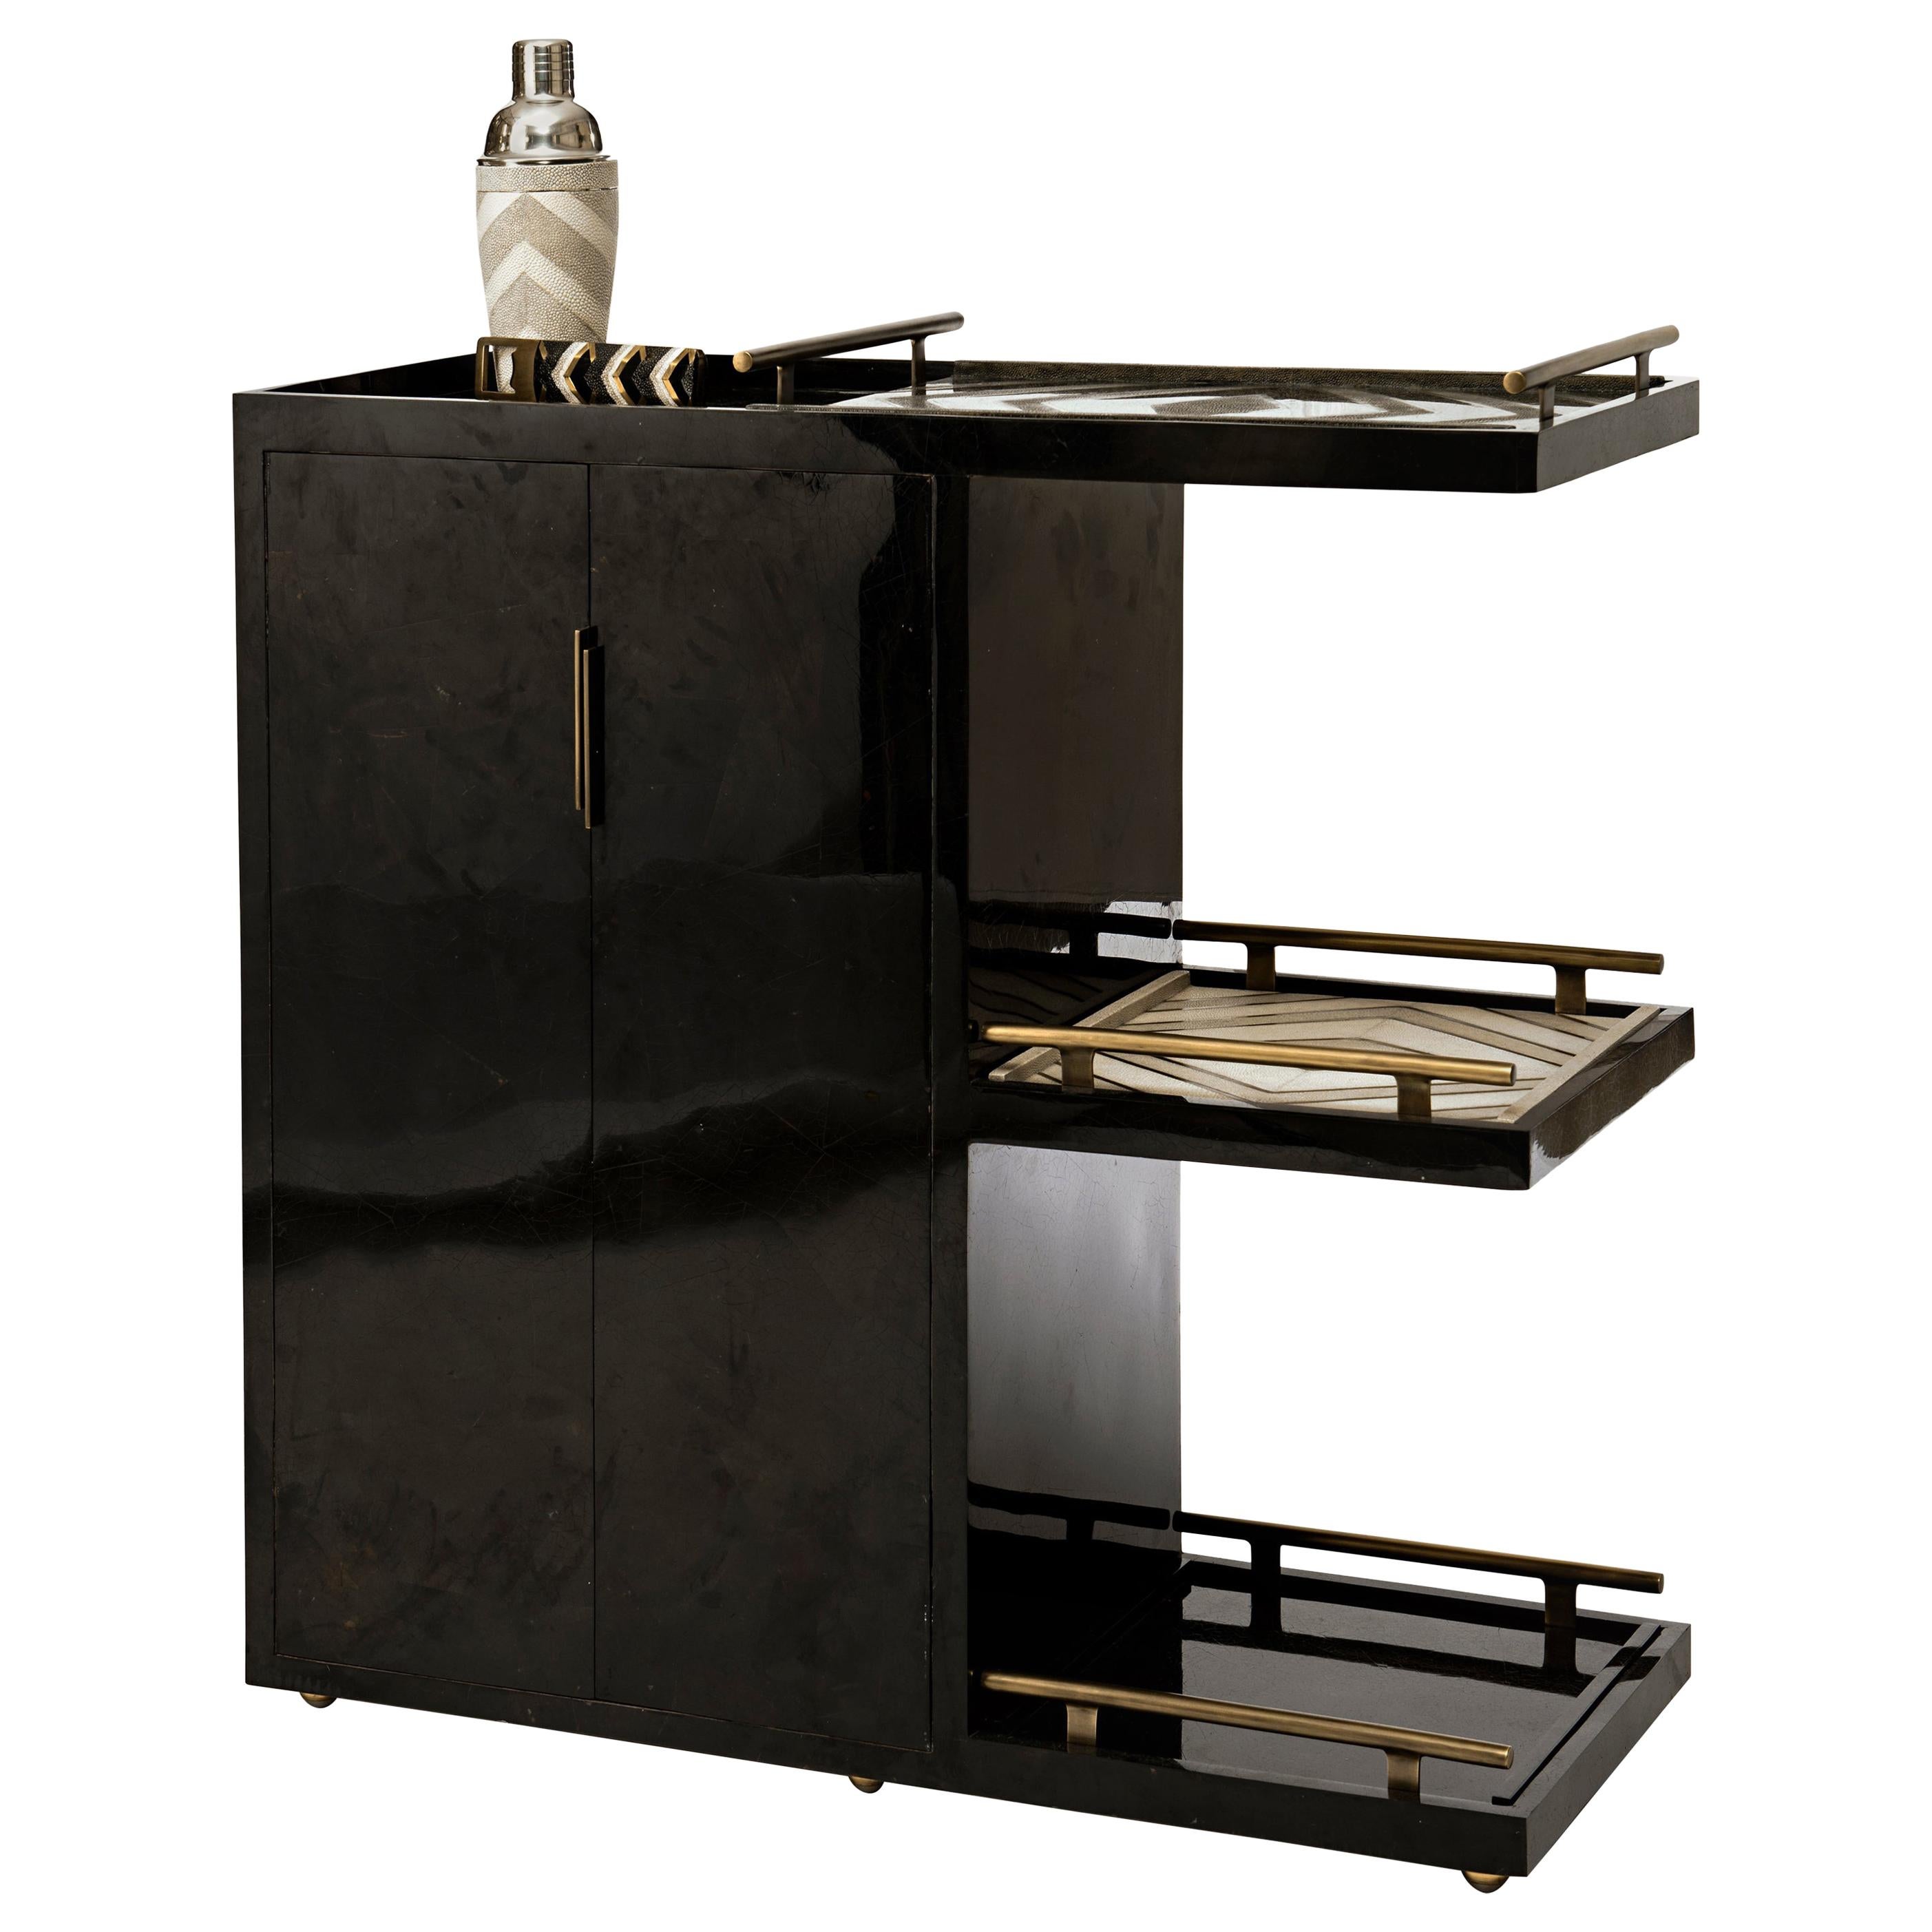 Bar Trolley in Black Pen Shell with 3 Removable Trays by Kifu Paris